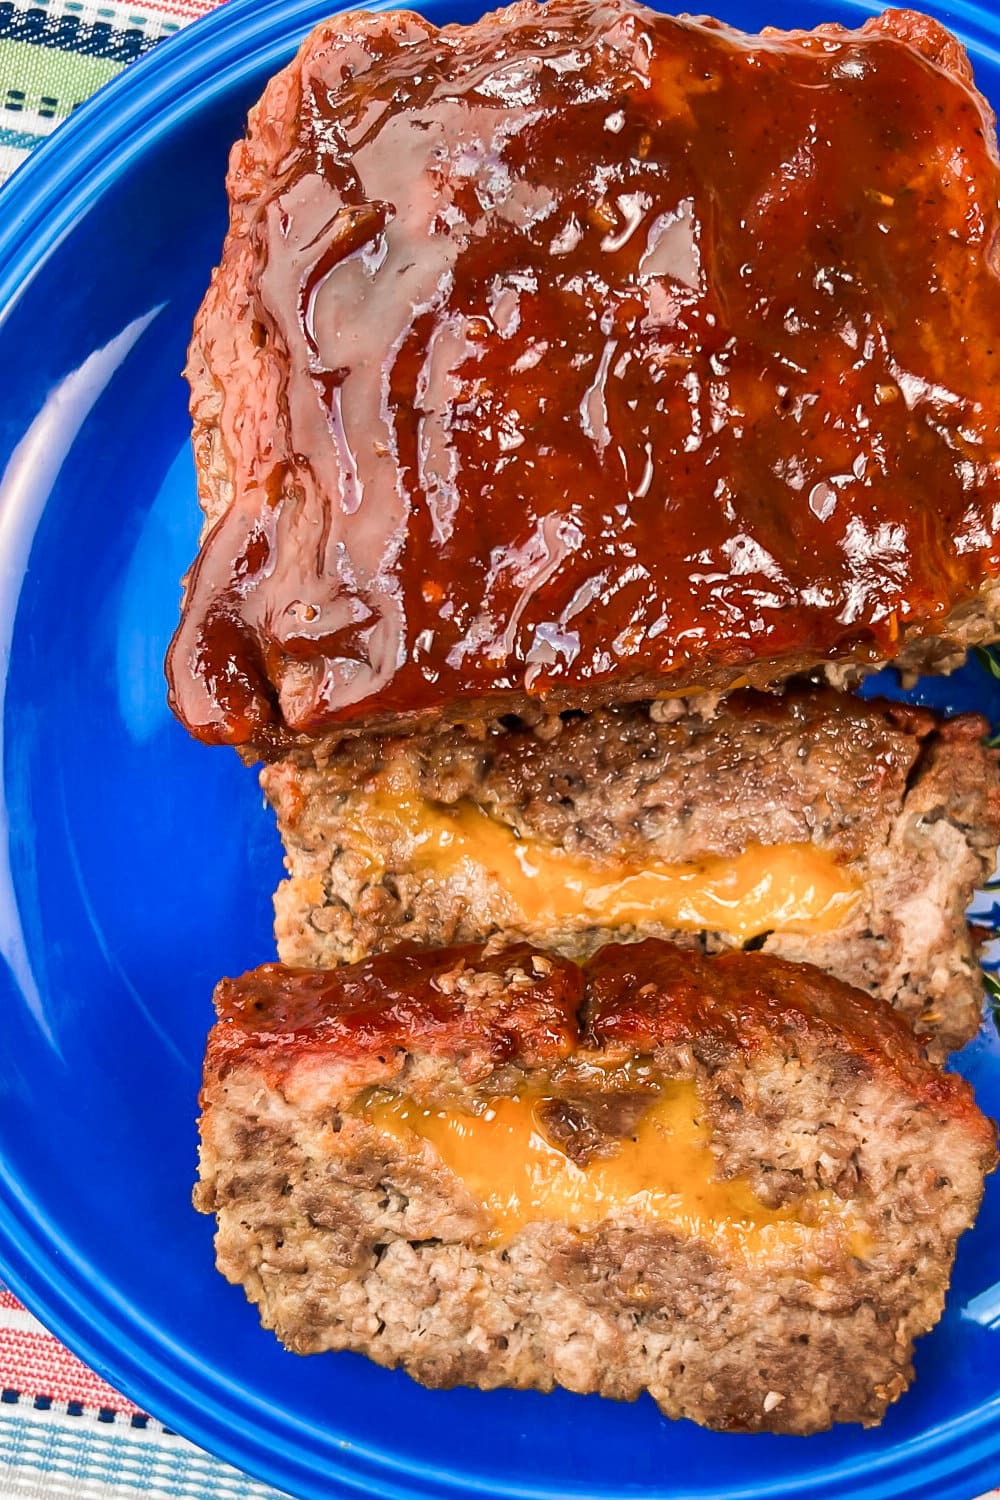 Sliced smoked whiskey-barbecue meatloaf on a blue platter.